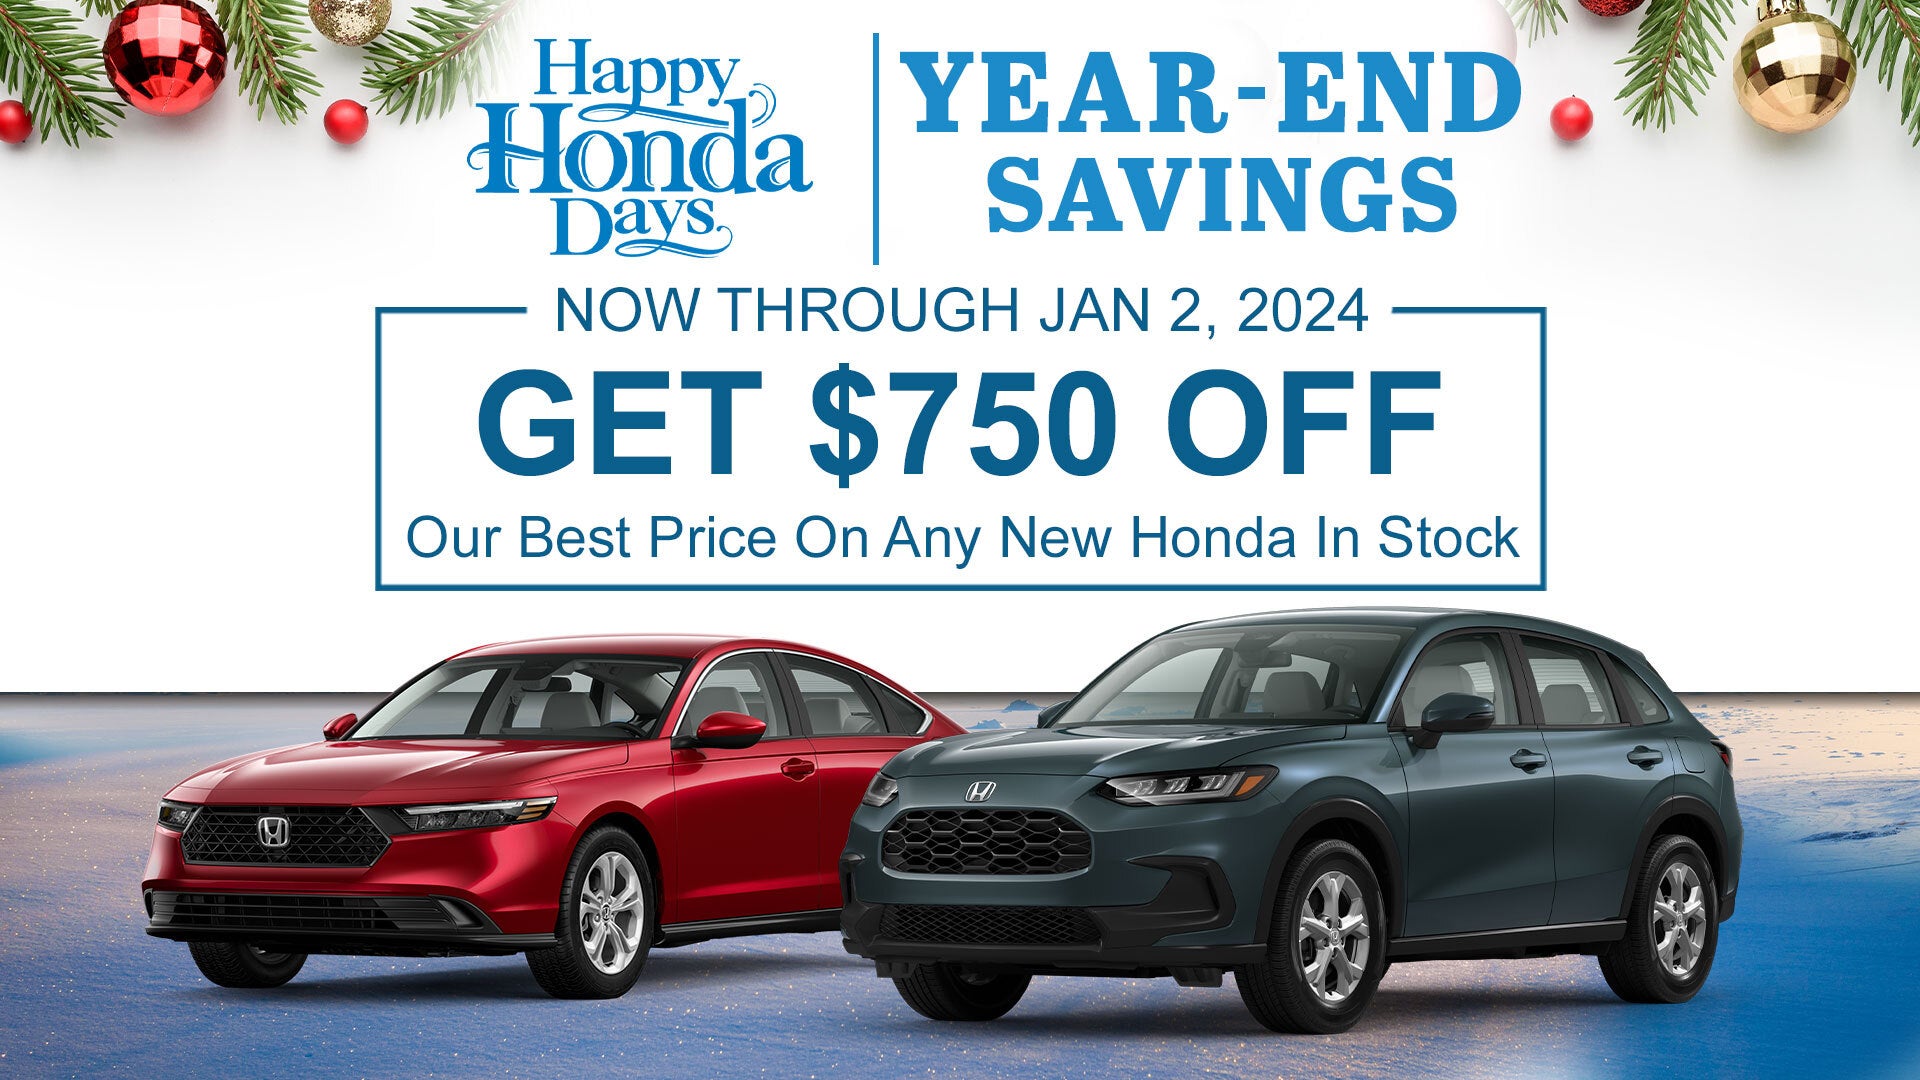 Happy Honda Days Year End Savings. Now through January 2, 2024 get $750 off Our Best Price on any new Honda in stock.